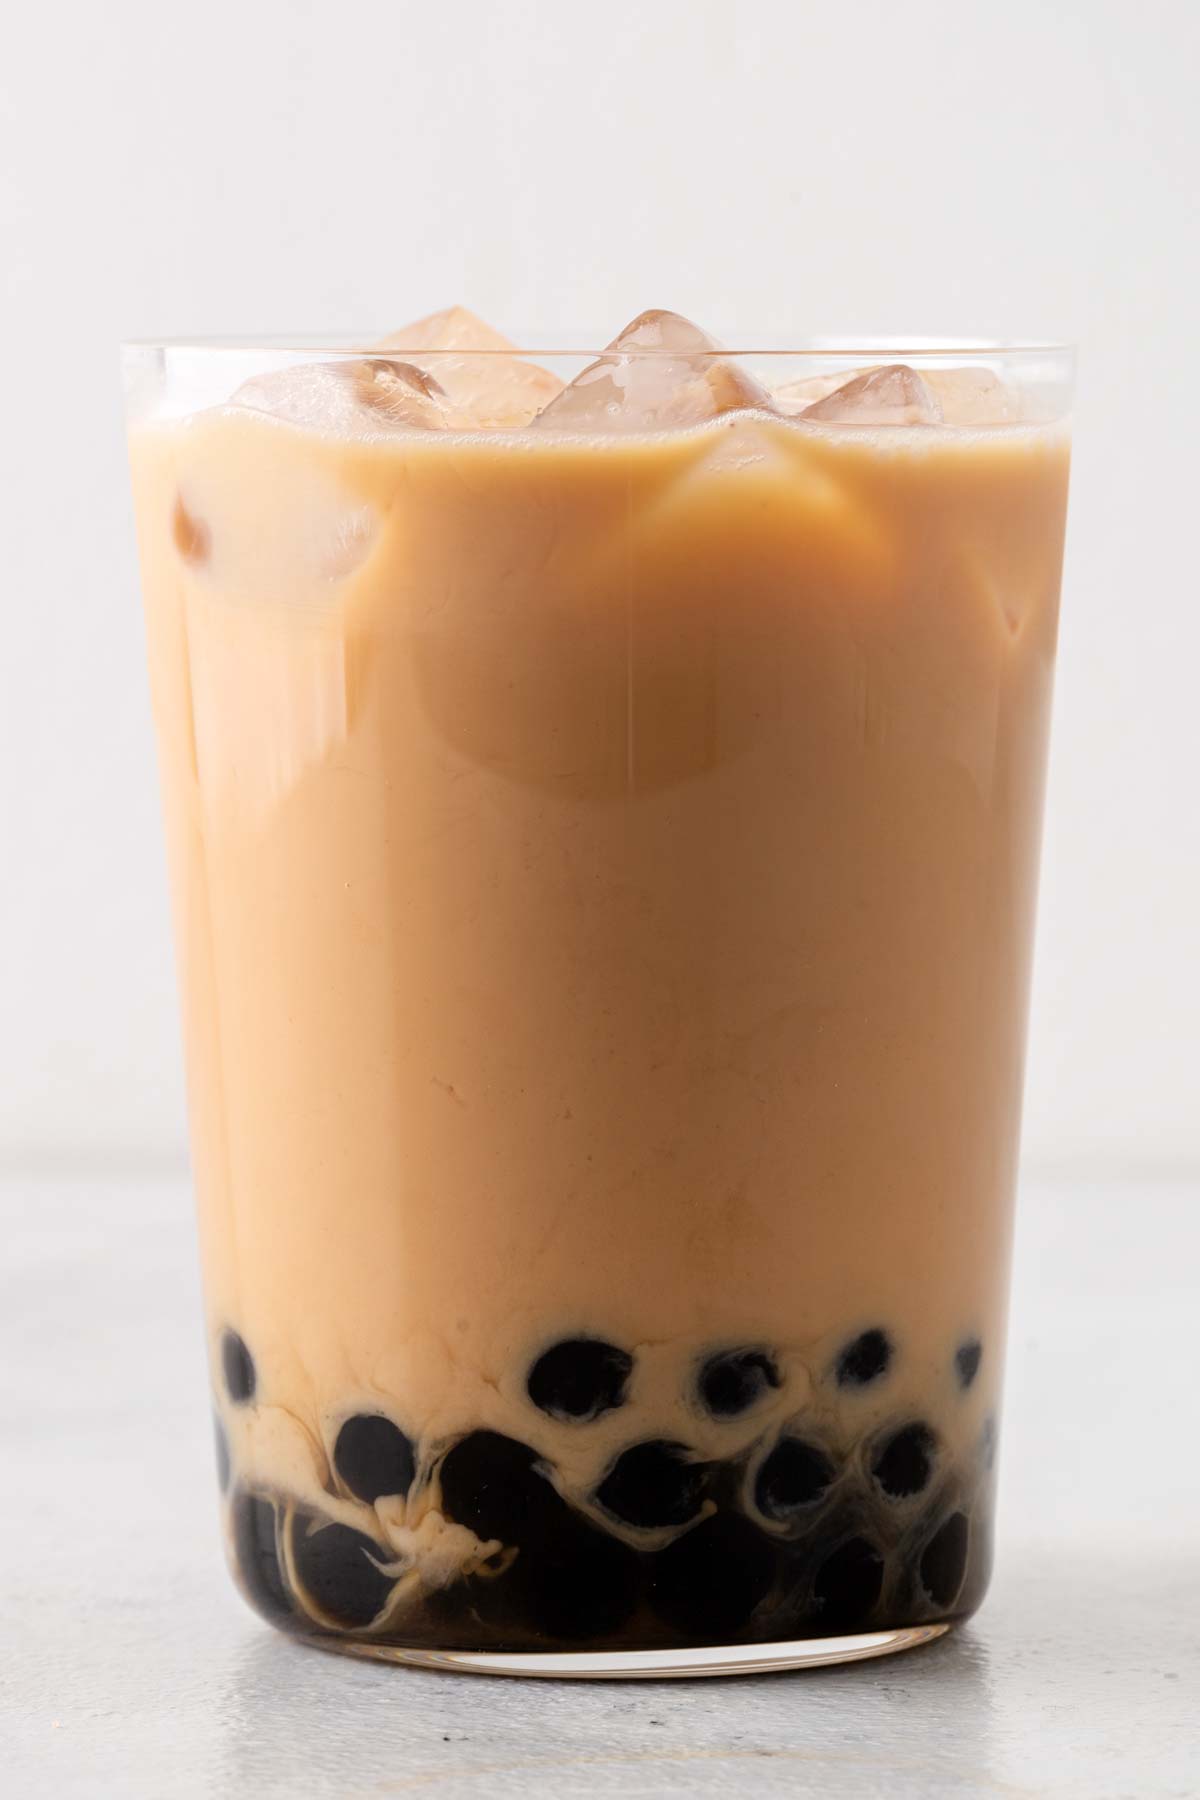 Finished Hong Kong Milk Tea (Hong Kong Bubble Tea) in a clear glass with boba at the bottom and ice on top.
